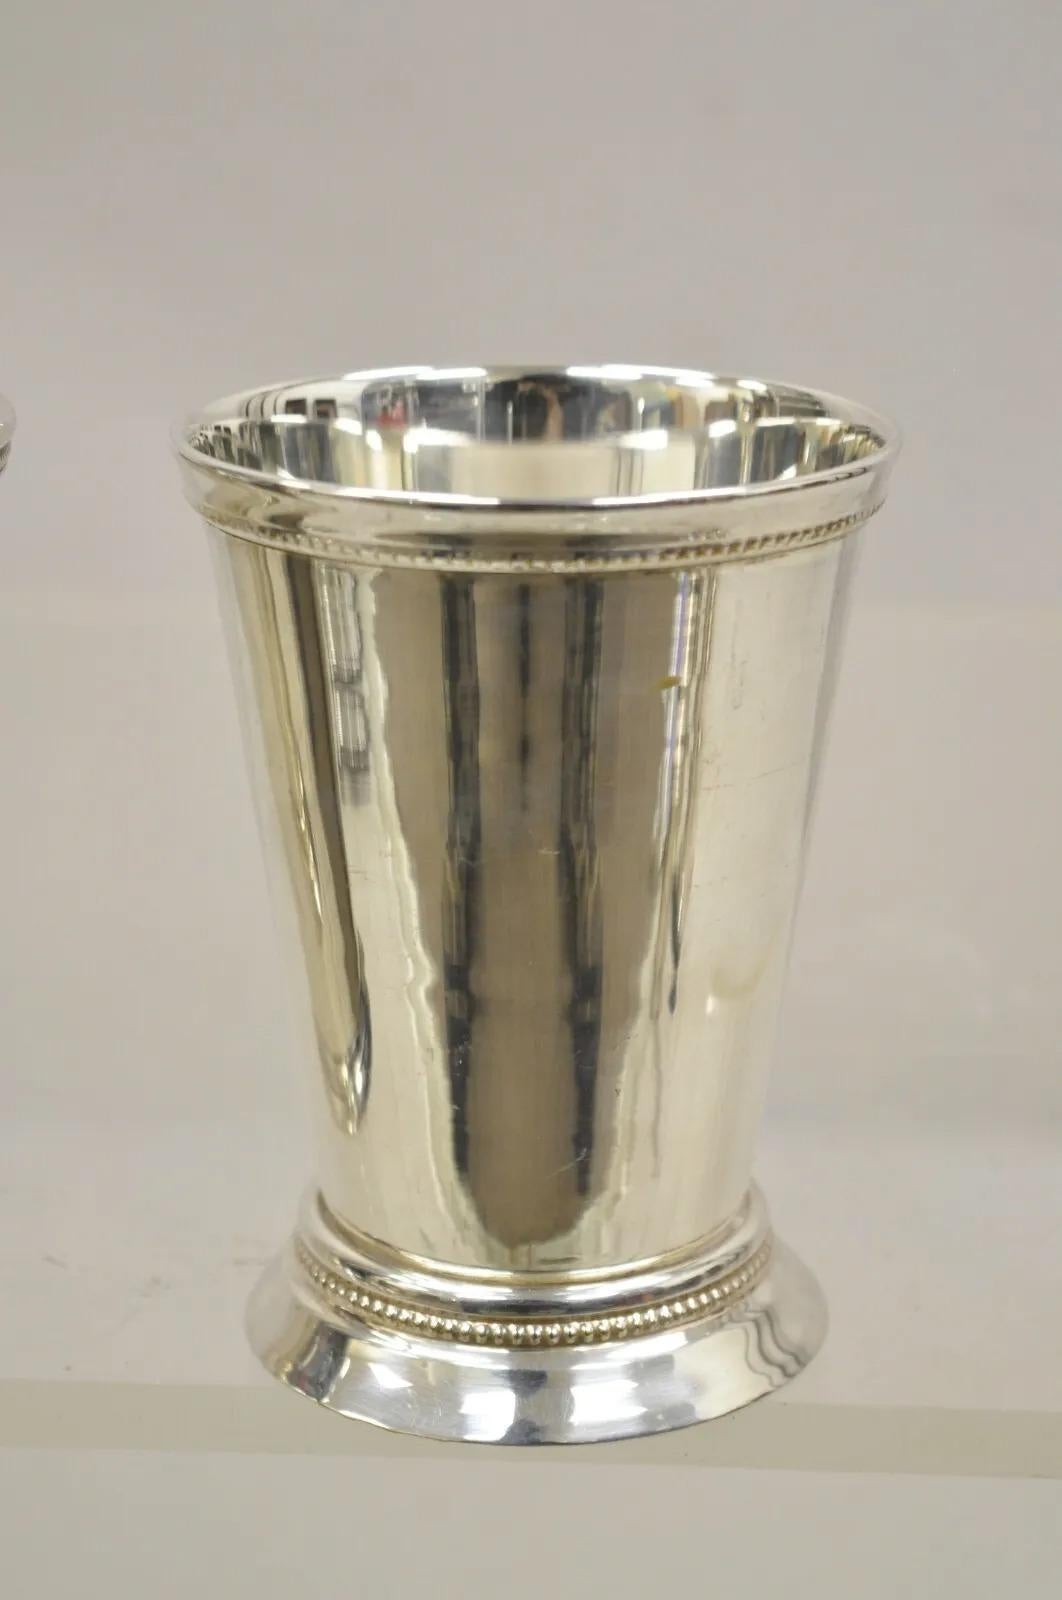 2 Vintage Silver Plated Mint Julep Cups Tumblers 1 with Monogram - 2 Pieces For Sale 3